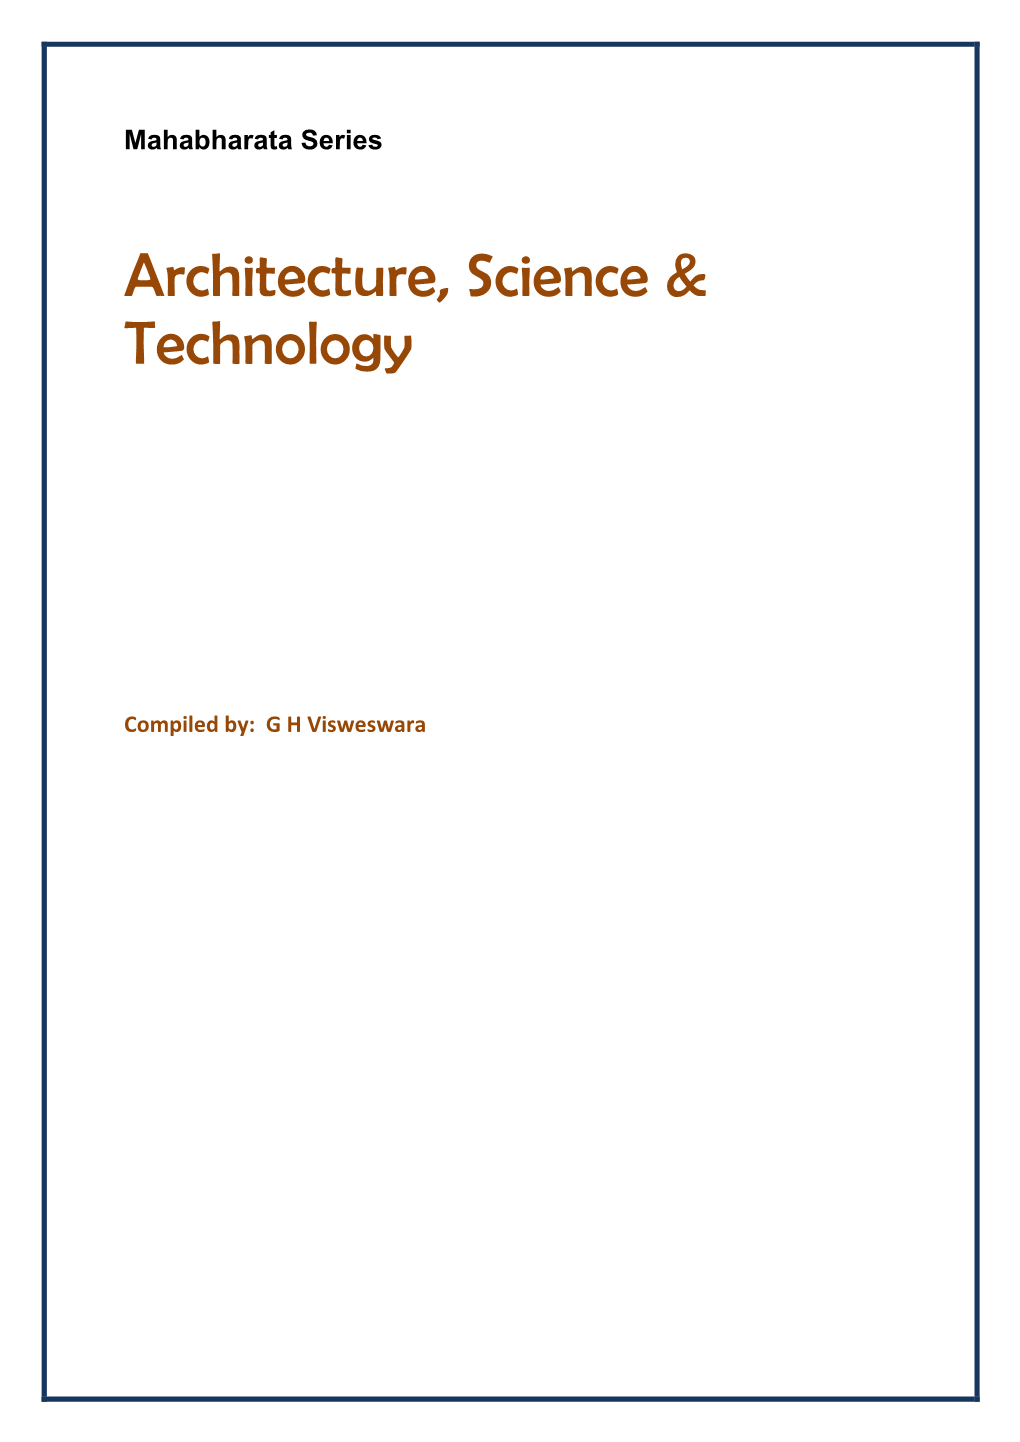 Architecture, Science & Technology